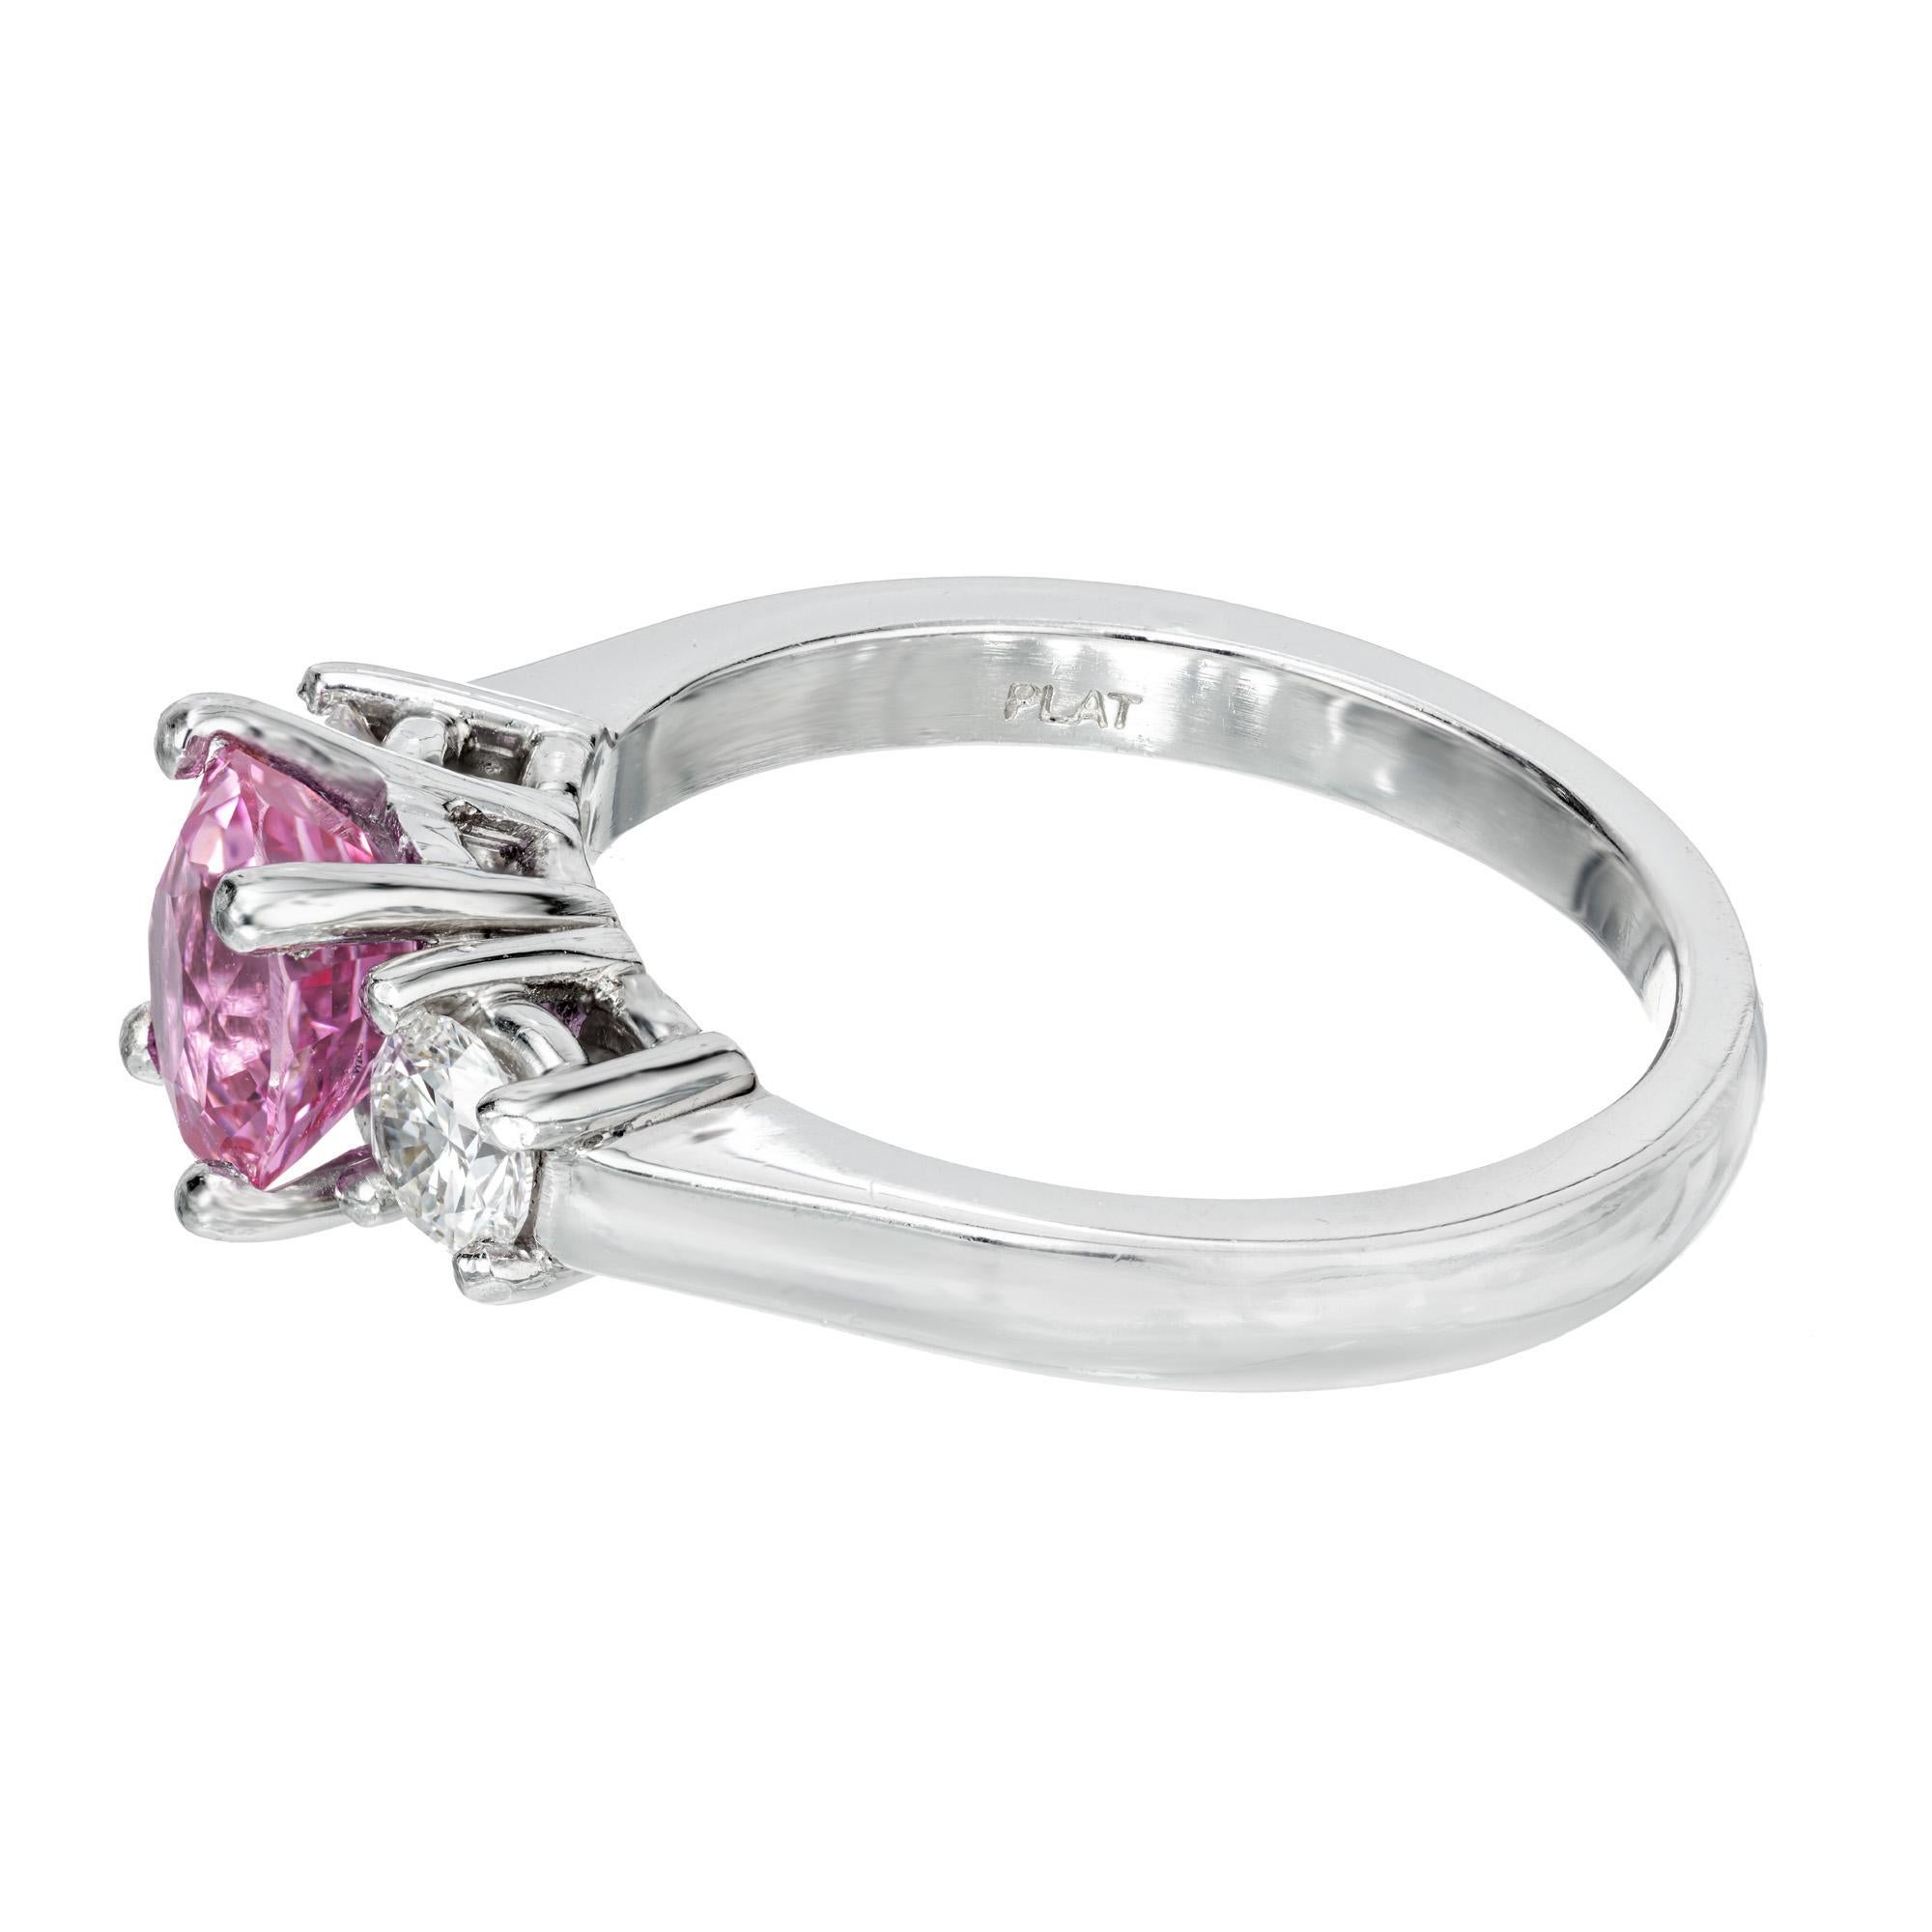 For Sale:  AGL Certified 1.79 Carat Pink Sapphire Diamond Platinum Engagement Ring 3